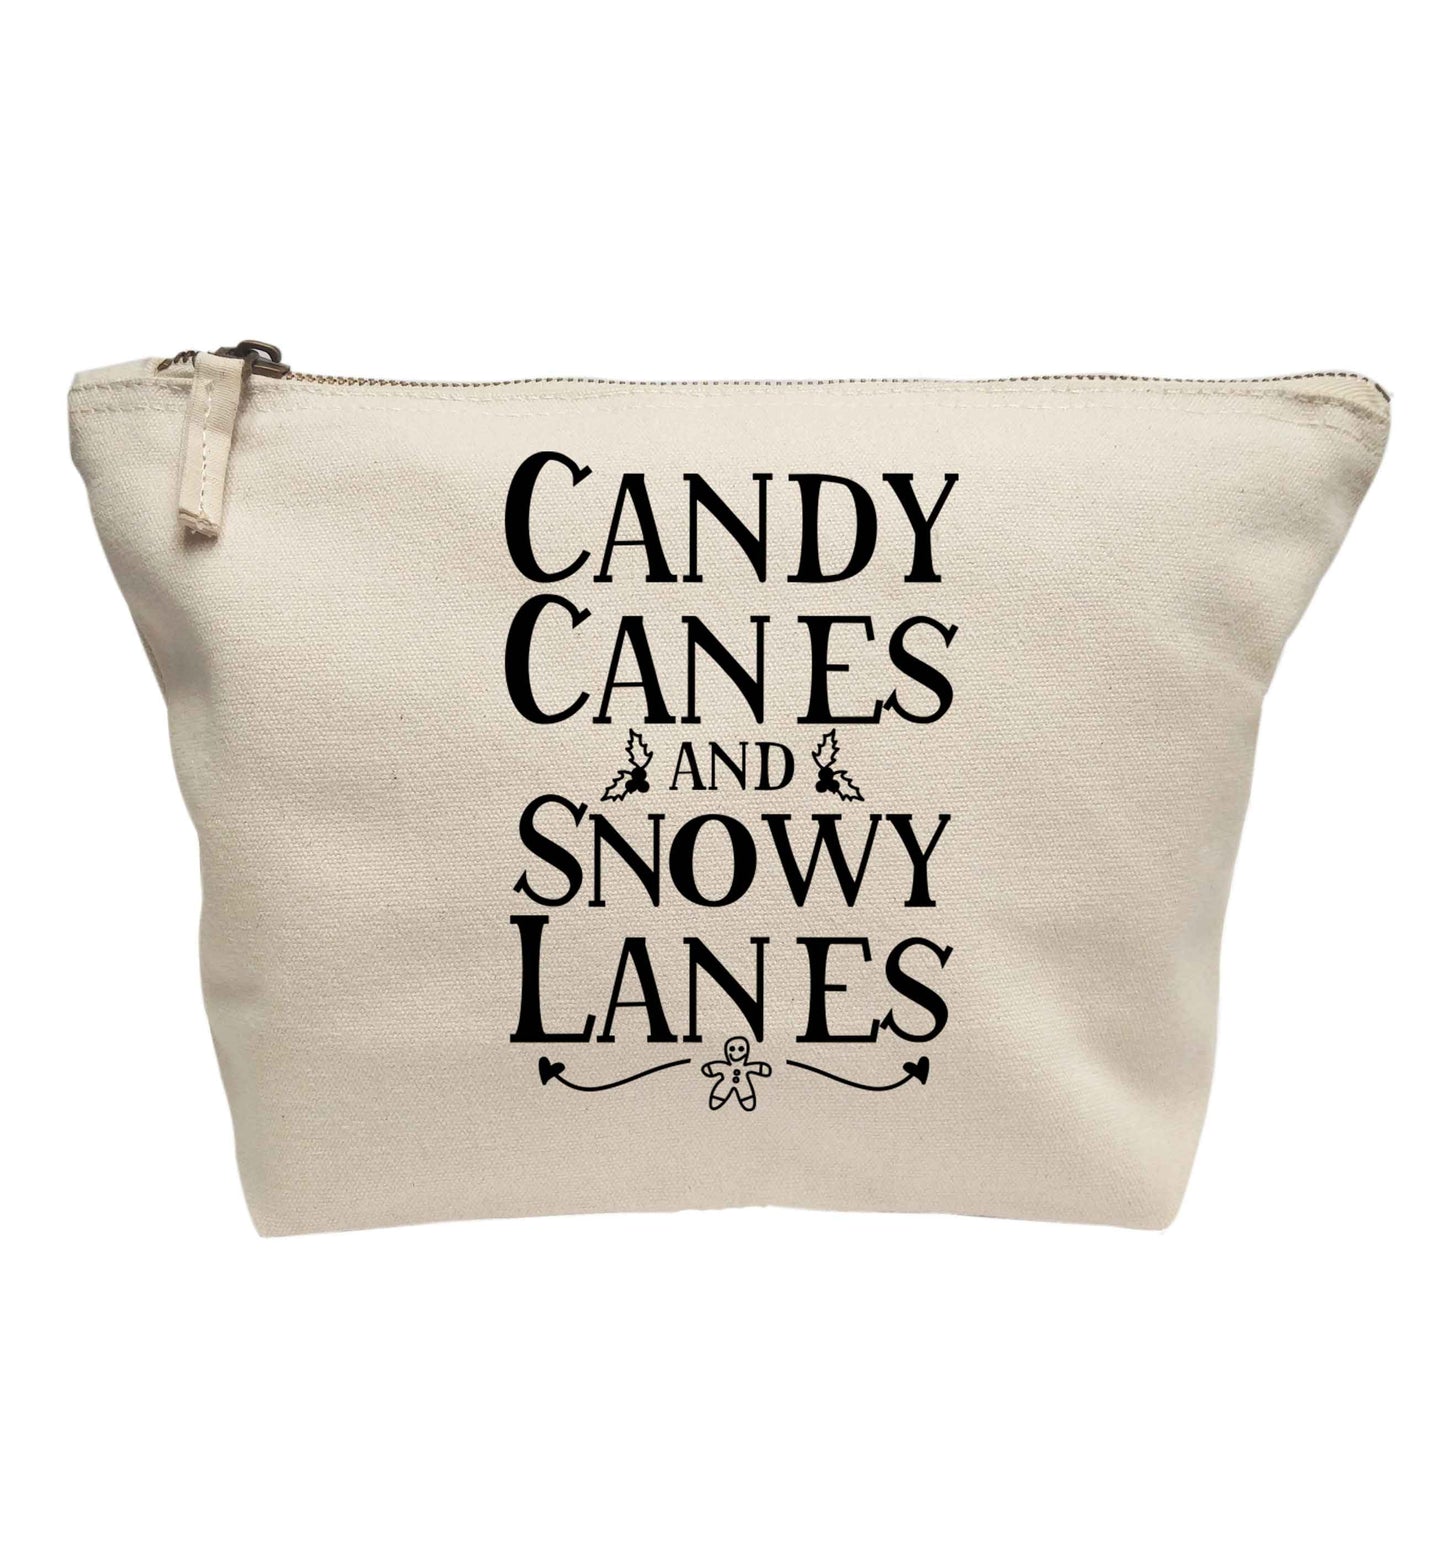 Candy canes and snowy lanes | makeup / wash bag